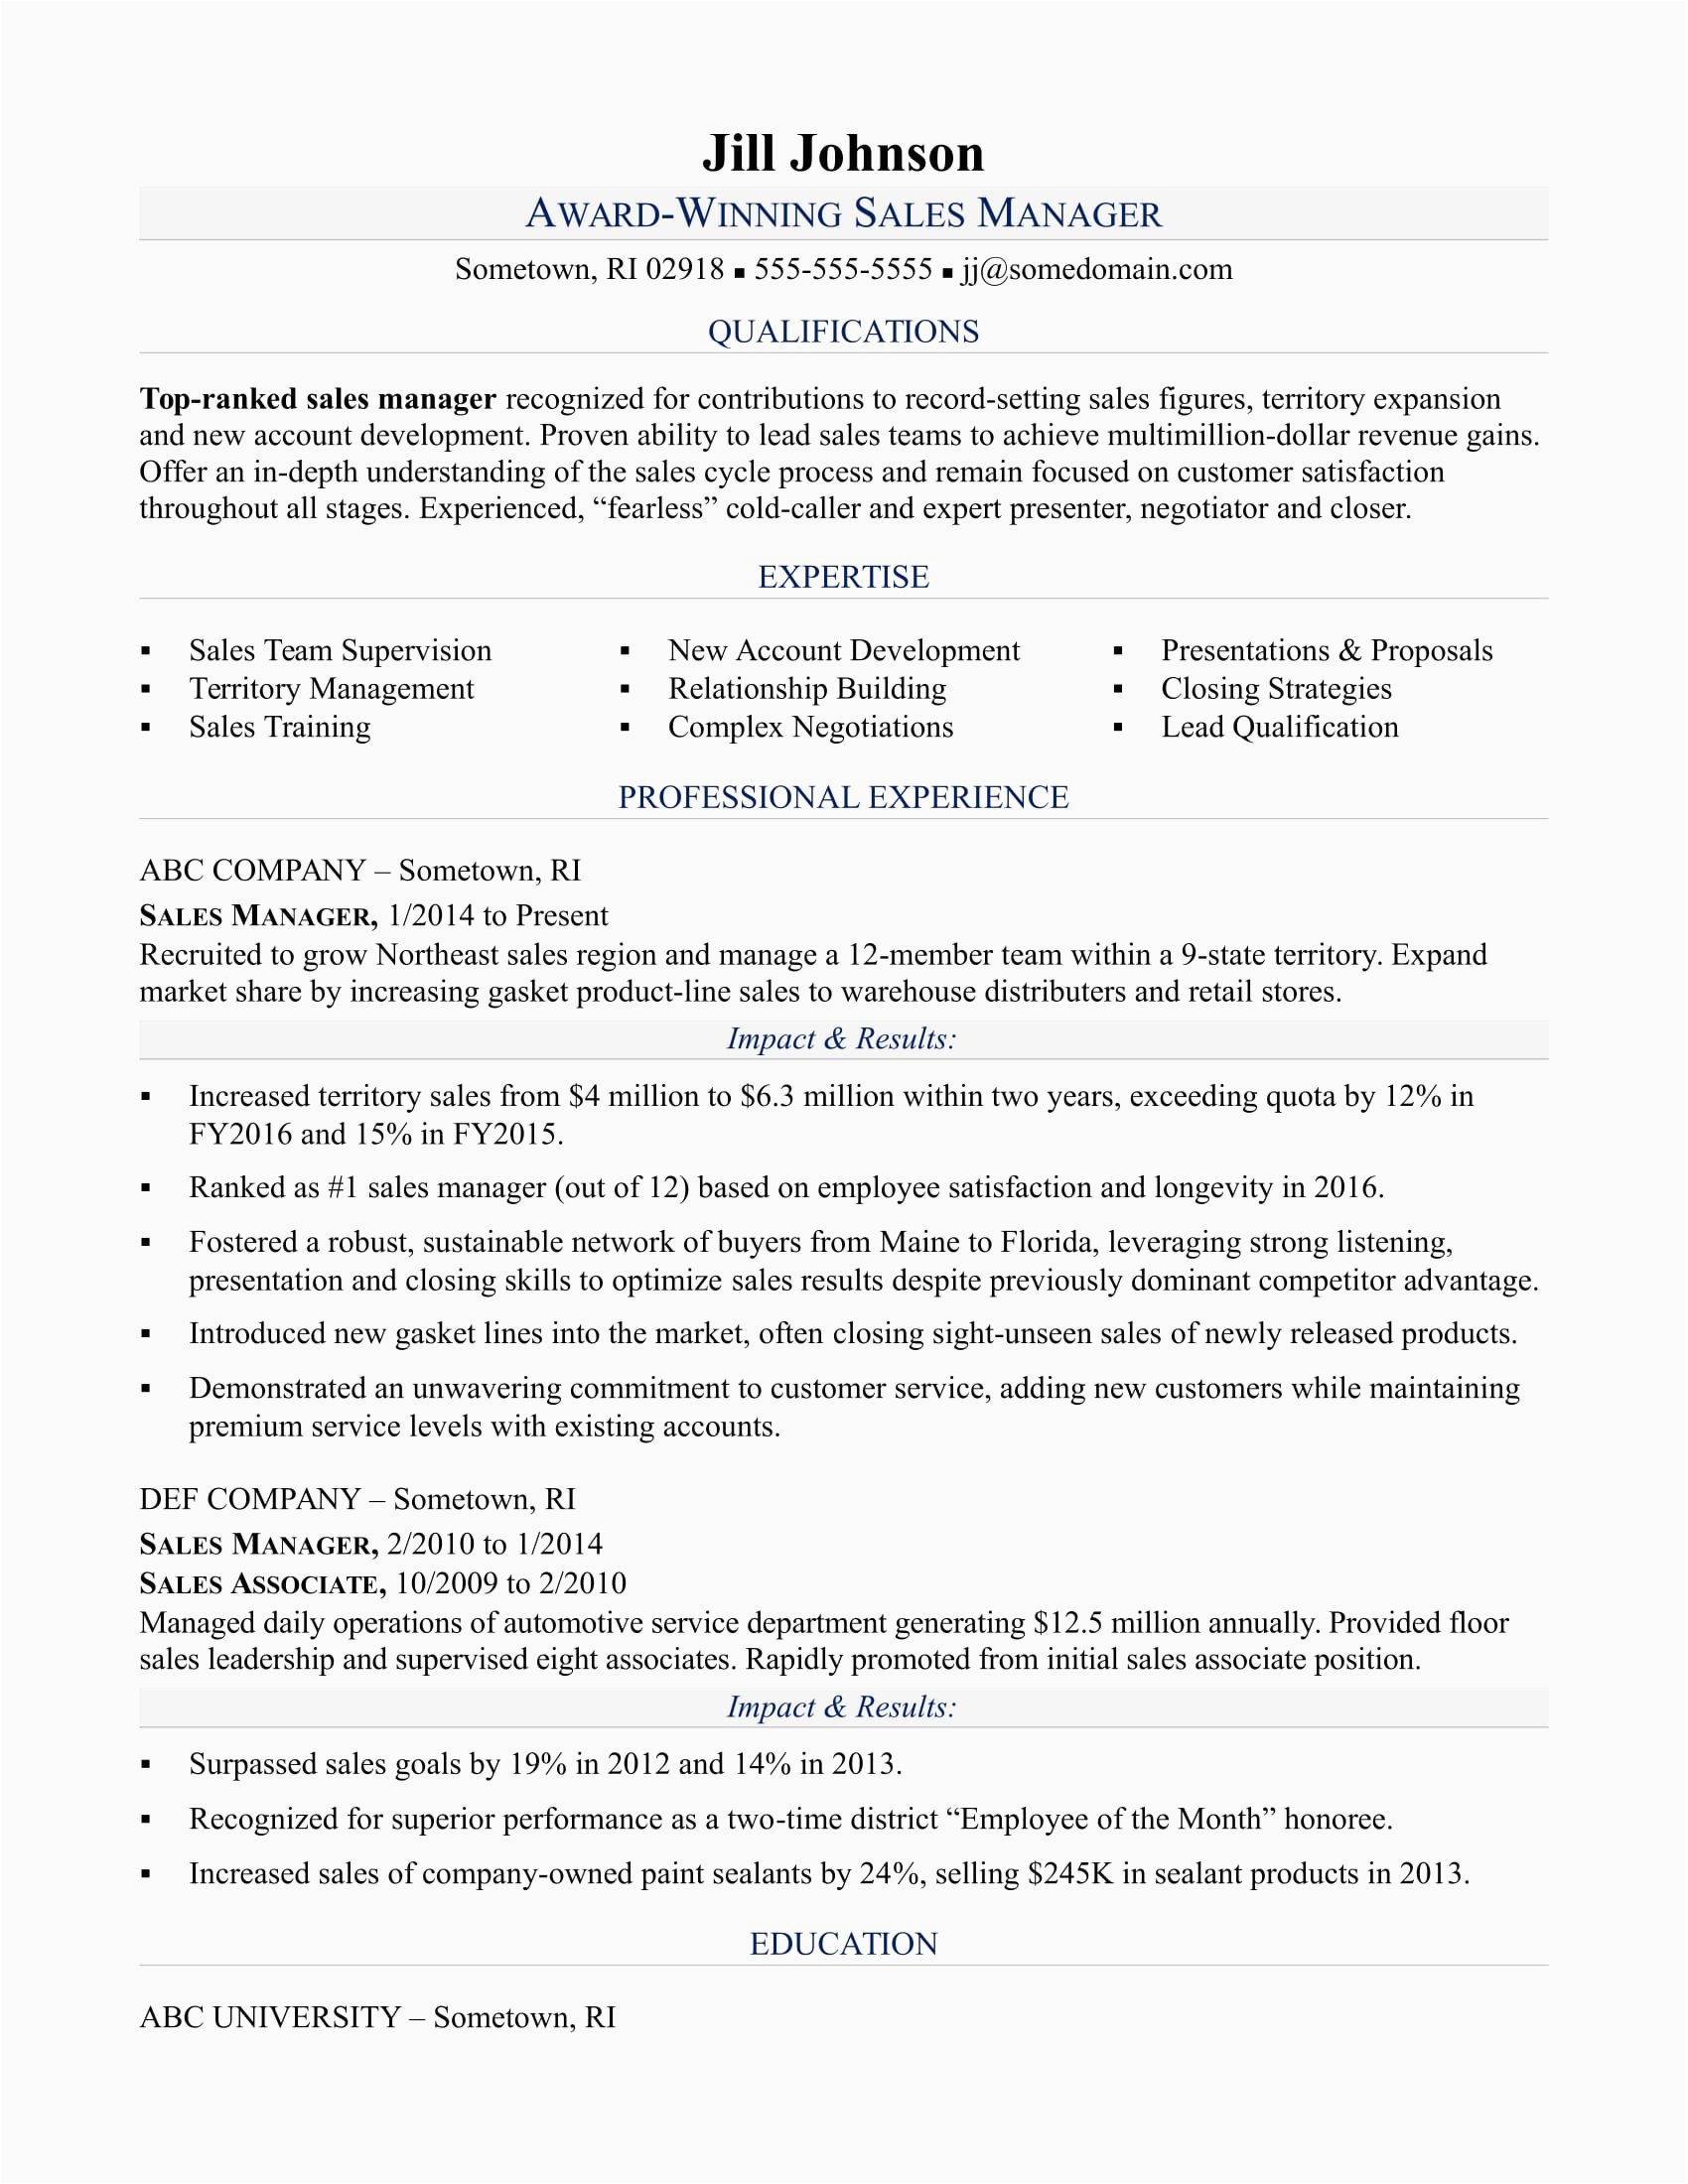 Resume Template Same Company Different Jobs √ 20 Resume for Promotion within Same Pany